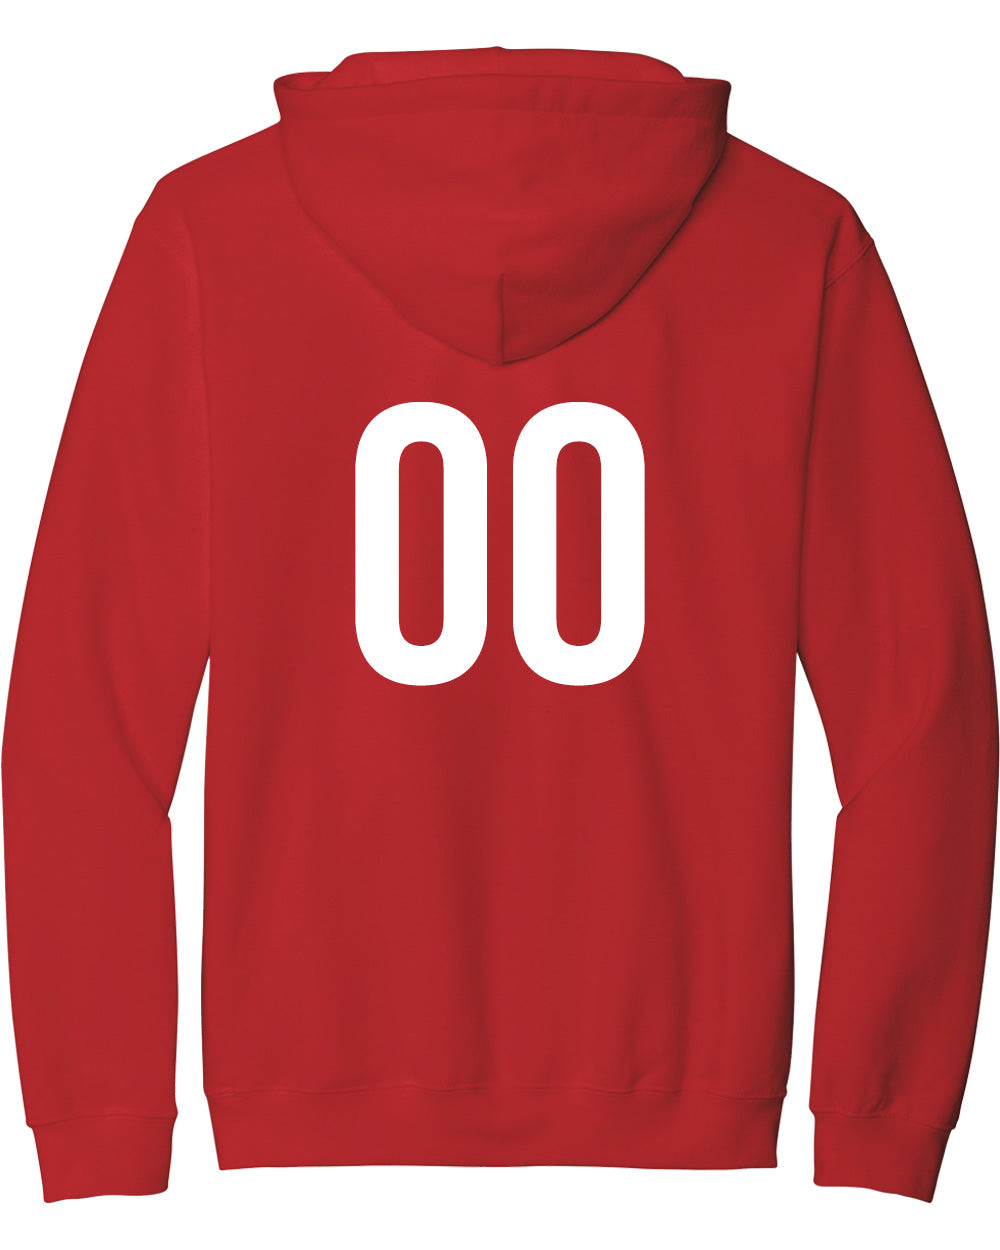 SCCS HOODY LOGO COLOR TEXT